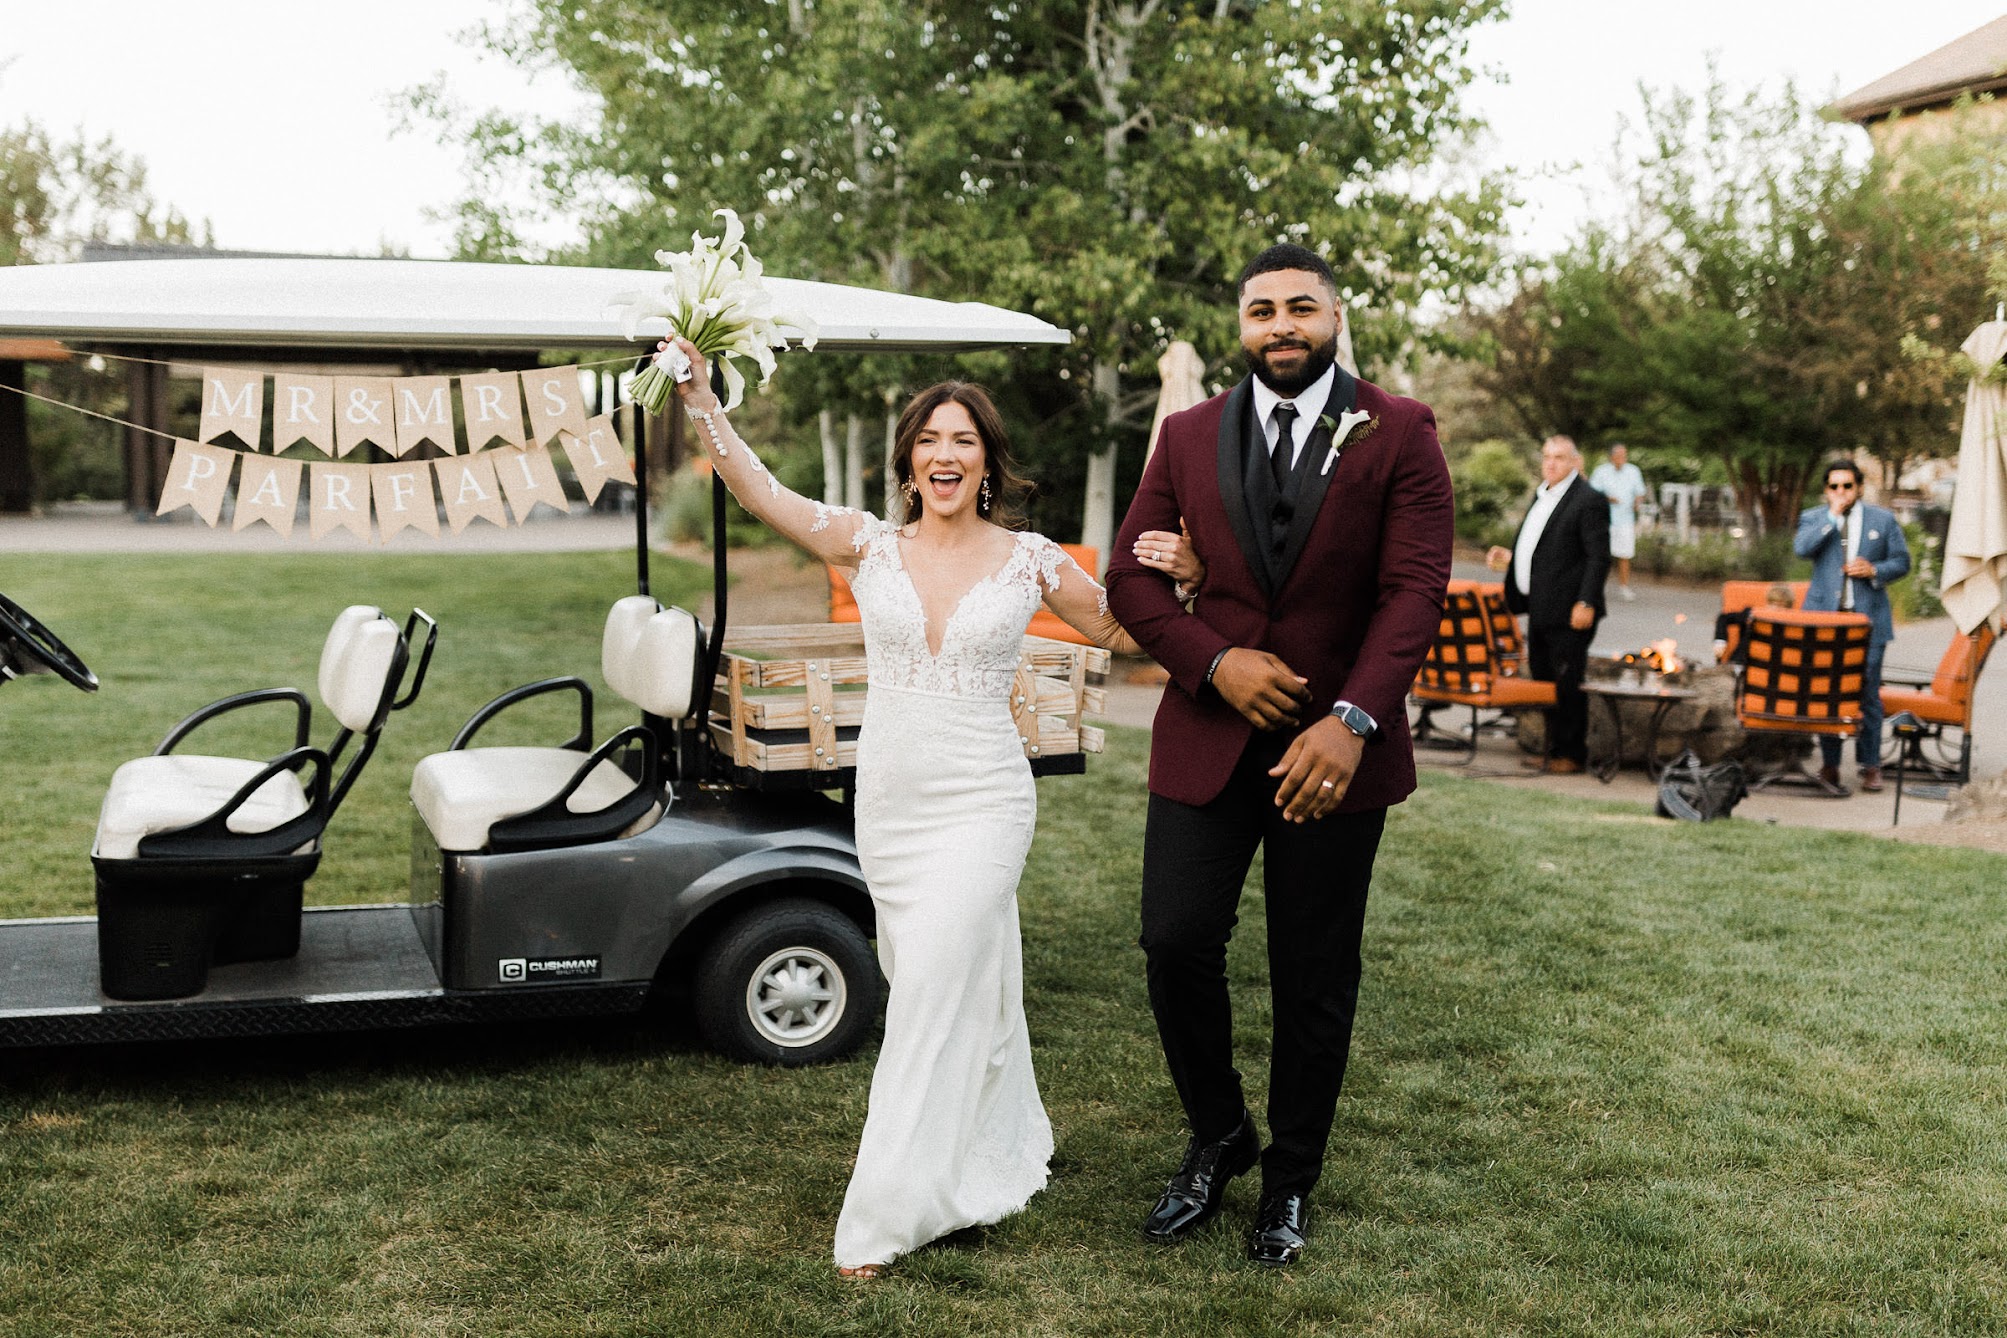 bride and groom walking into their wedding reception, behind them, a golf cart that says "Mr. & Mrs. Parfait"